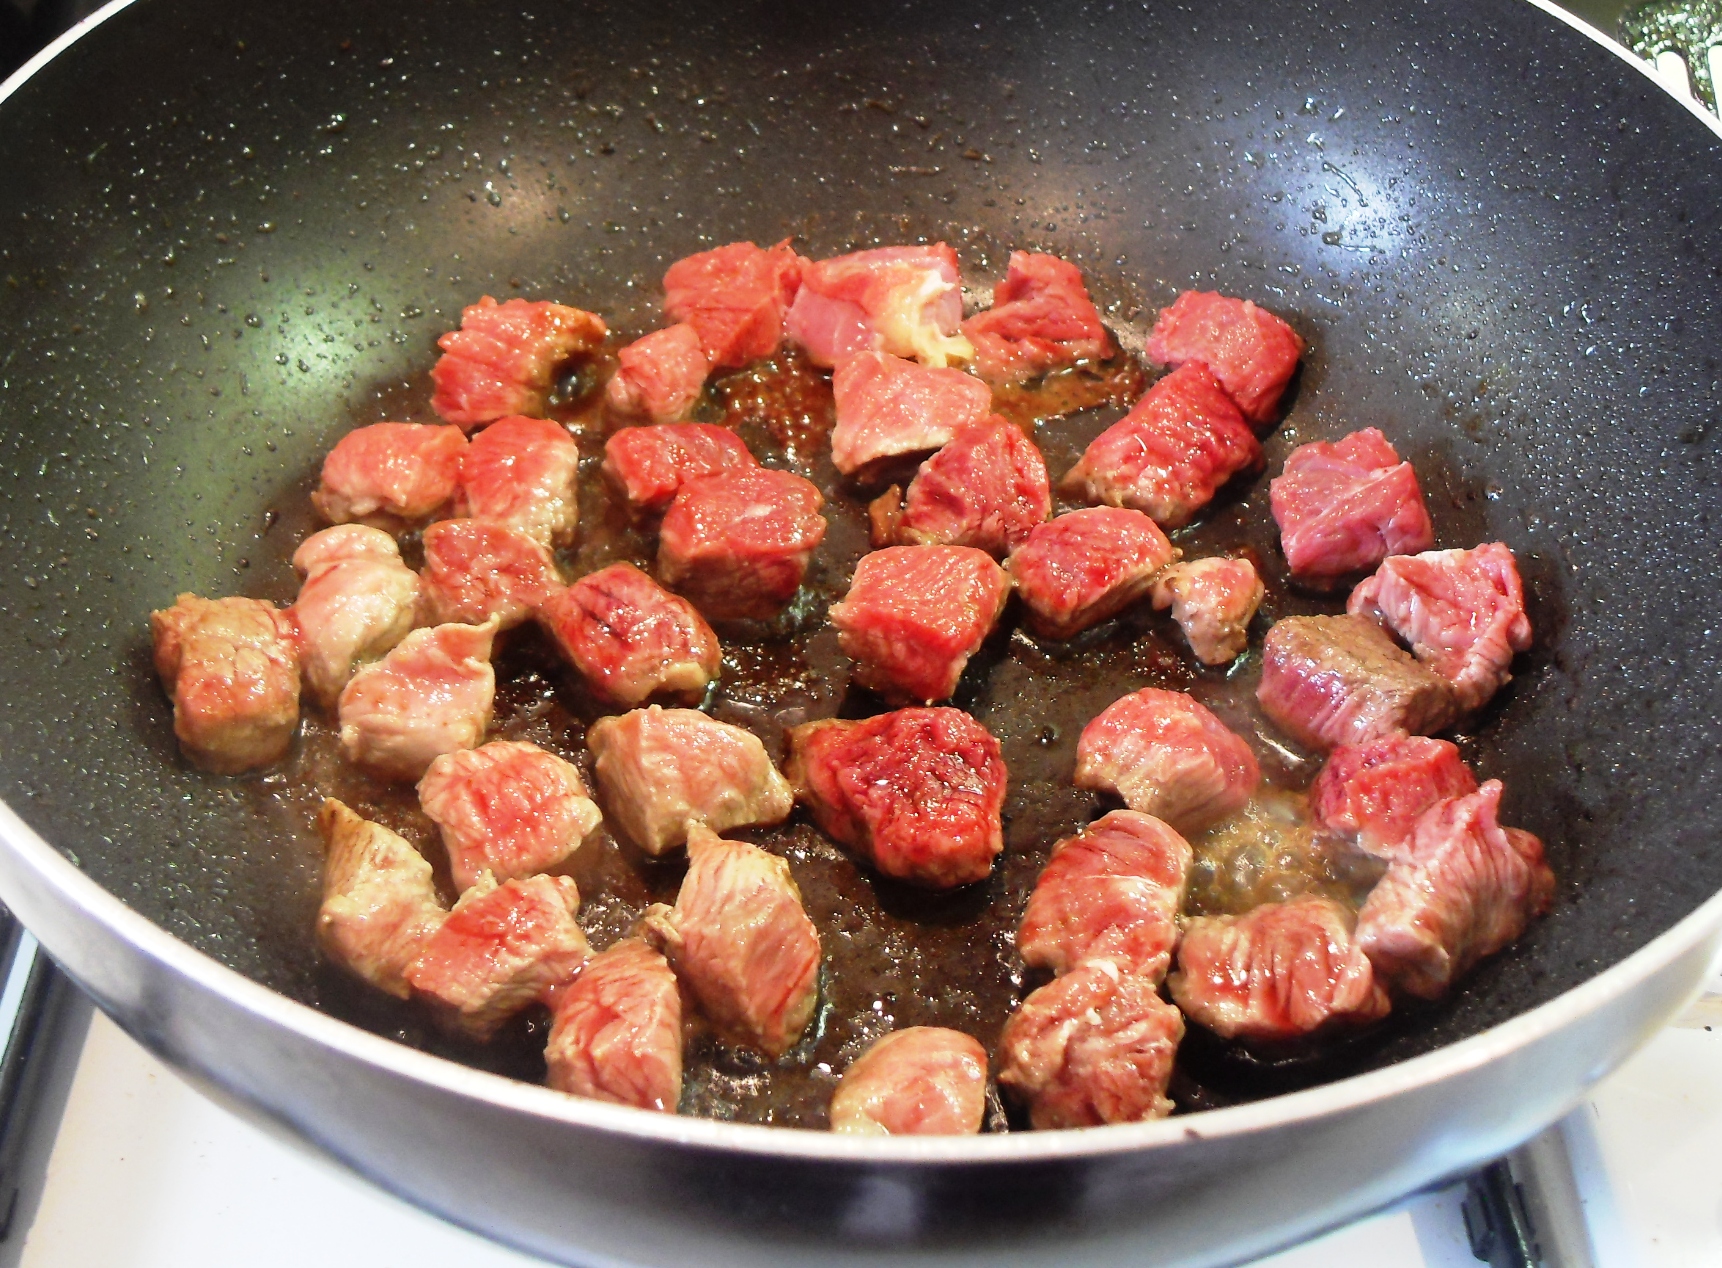 Beef being fried in a pan.